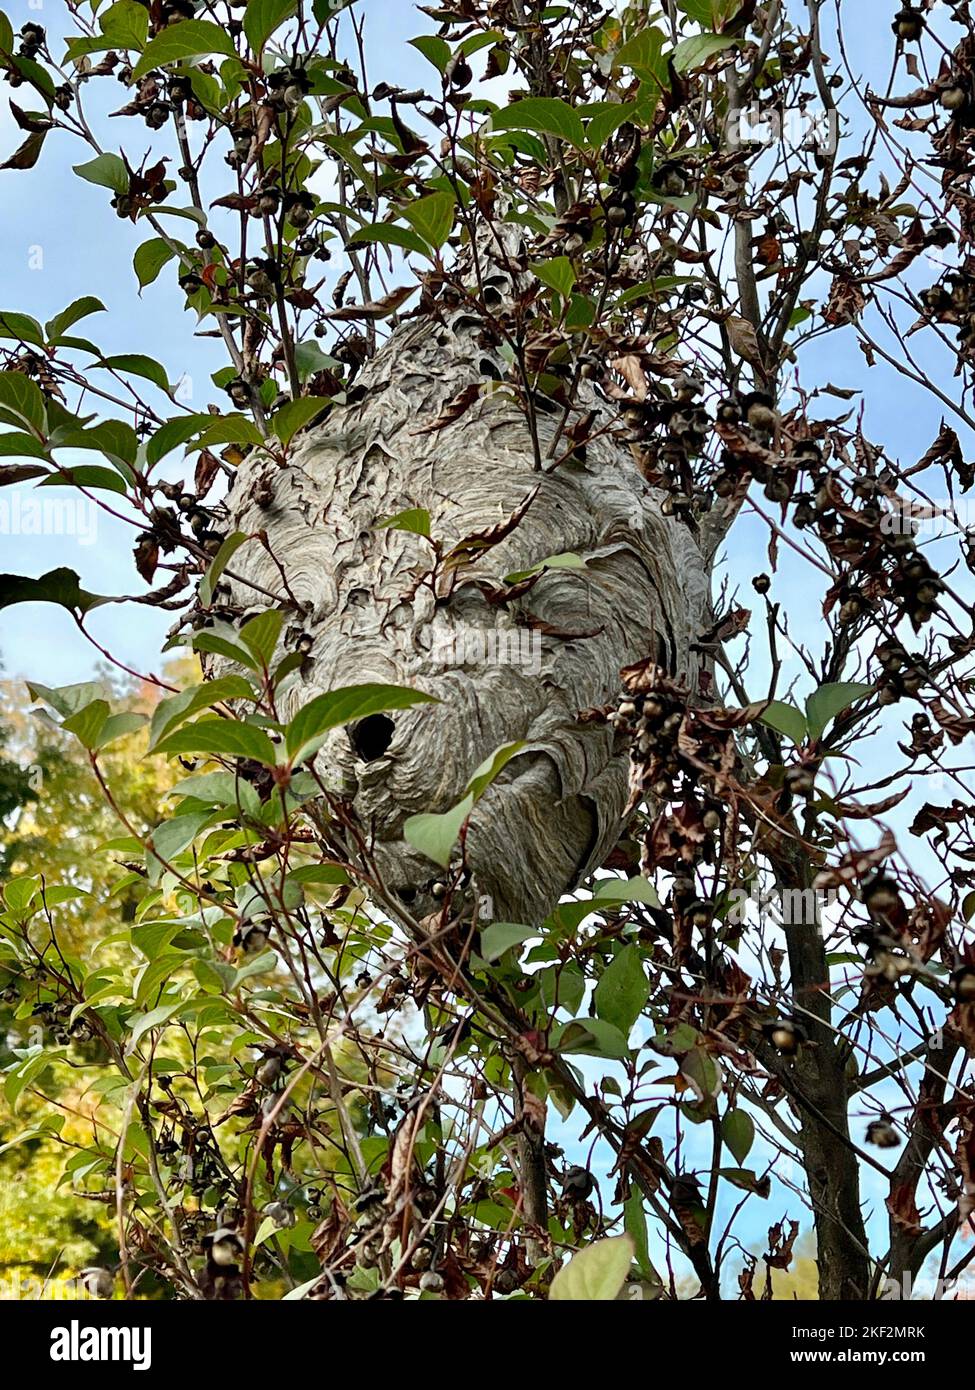 Large Hornet nest with the opening or entrance visible in the branches of a tree in Prospect Park, Brooklyn, New York. Stock Photo